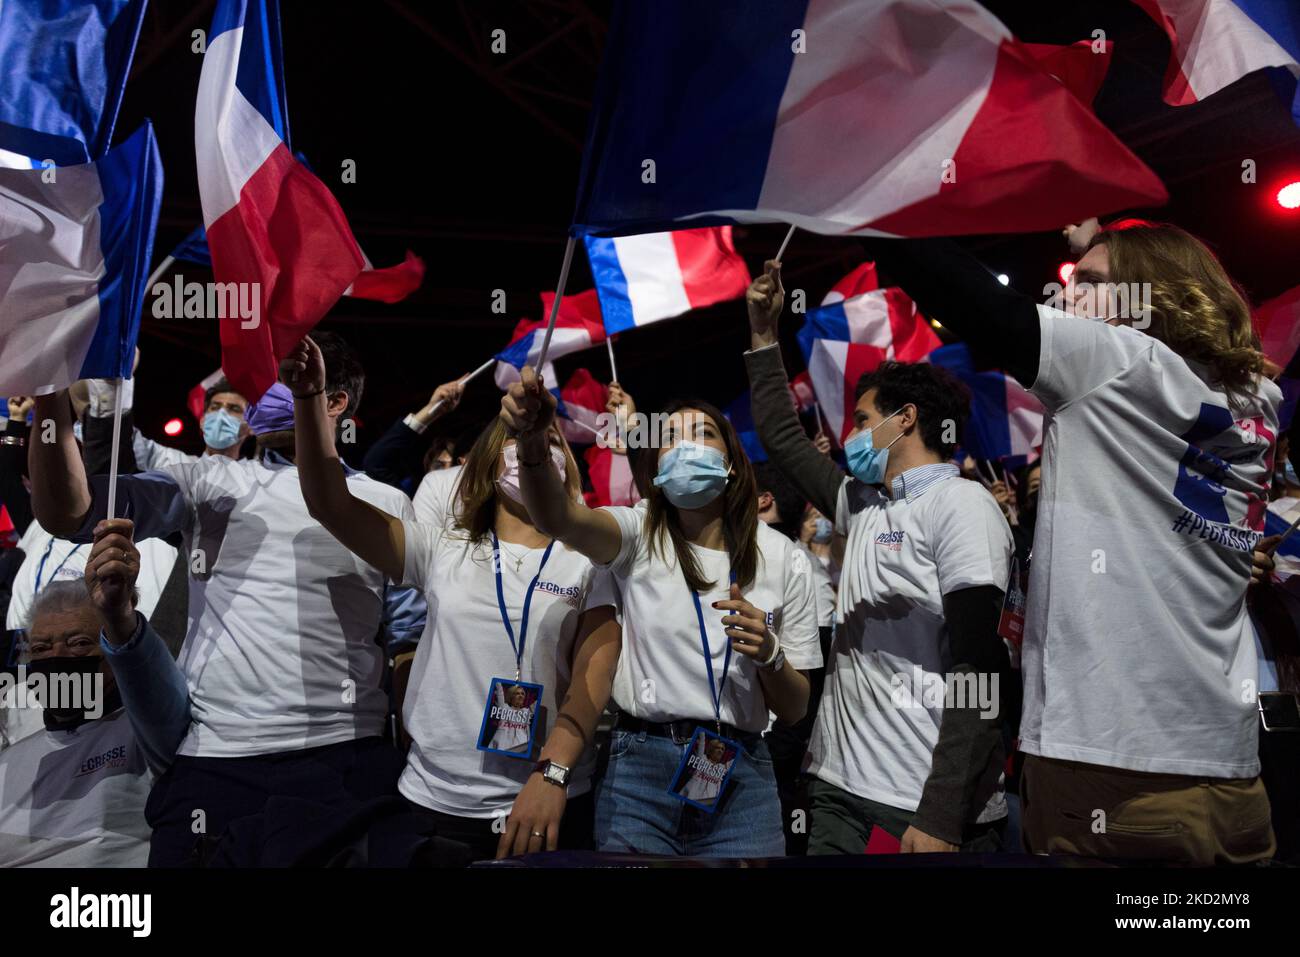 Supporters wave French flags during the meeting of French conservative party Les Républicains (LR) presidential candidate Valerie Pecresse at the Zenith in Paris, in Paris, on Feb. 13, 2022, ahead of the French presidential election in April 2022. (Photo by Samuel Boivin/NurPhoto) Stock Photo